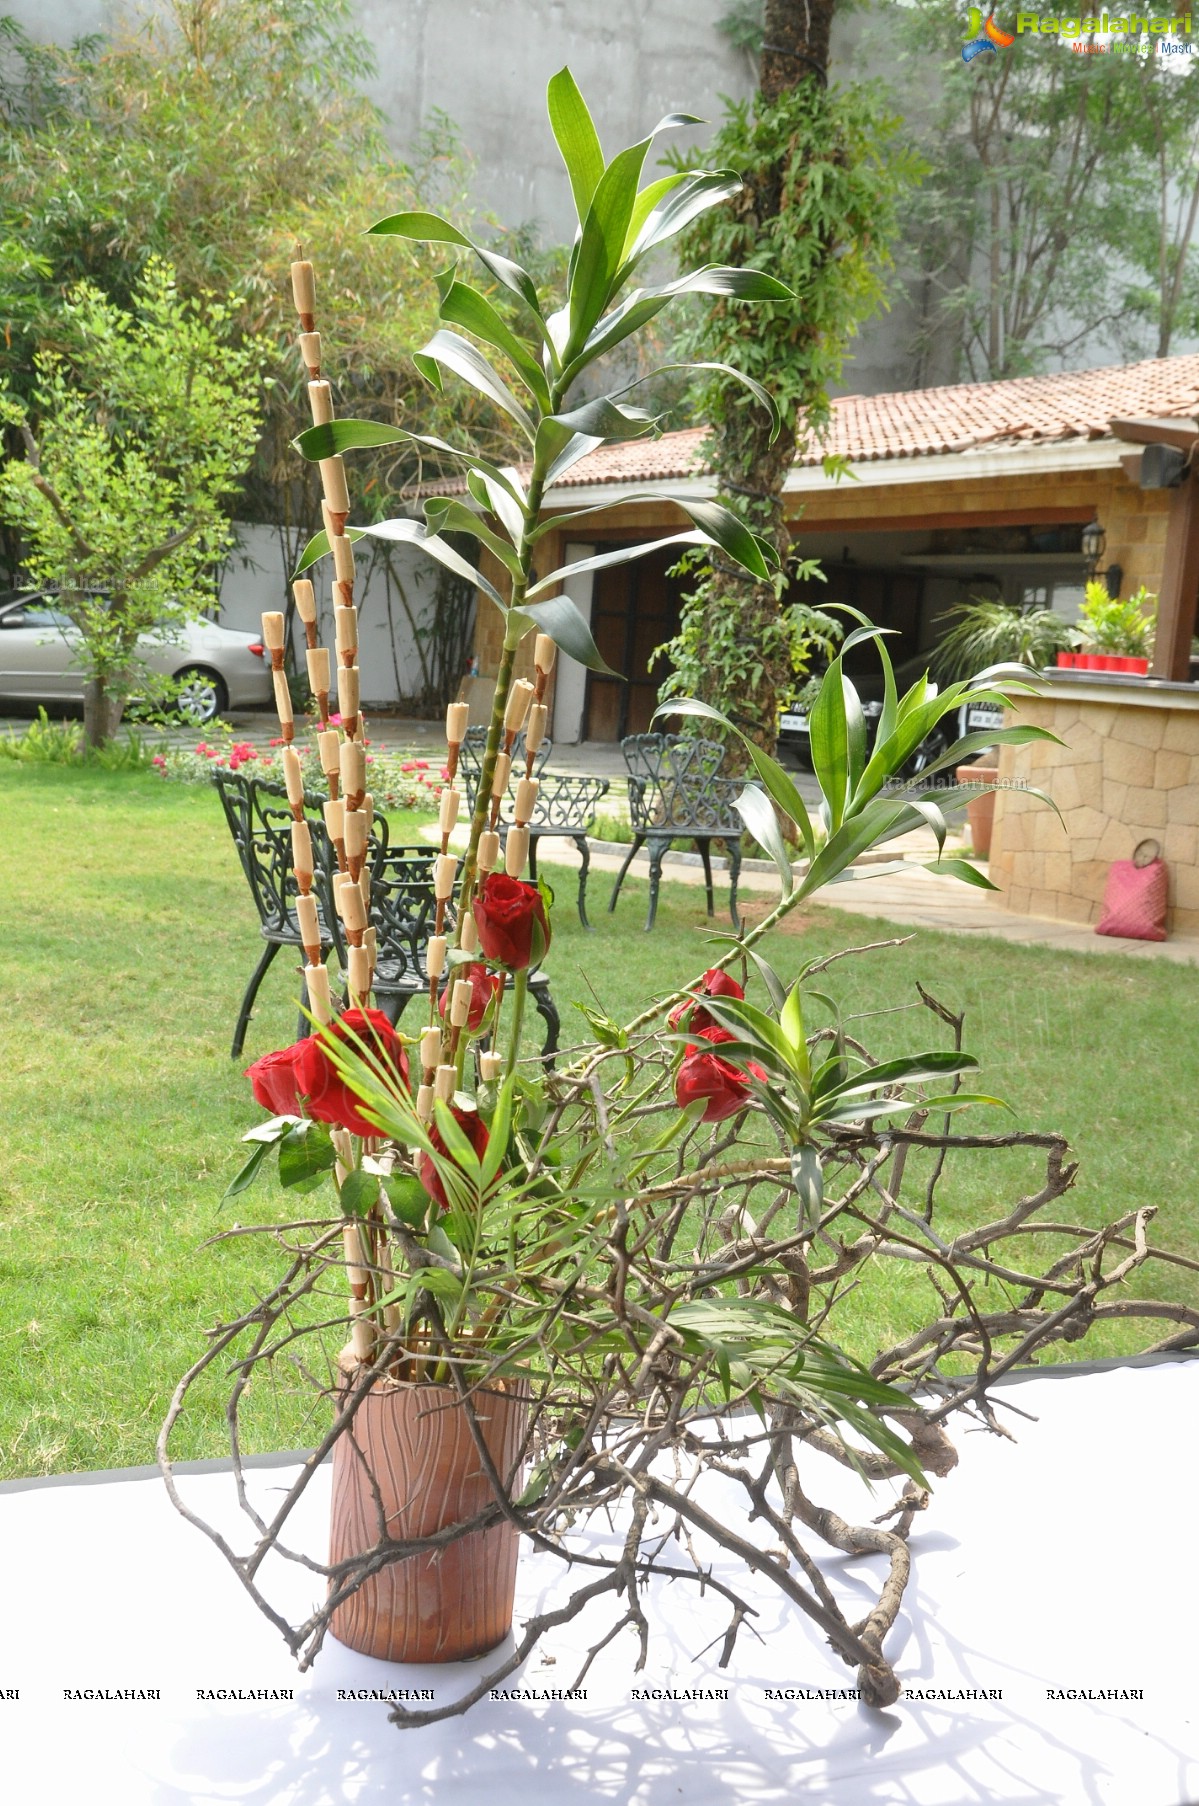 Mini lkebana Exhibition with Dry-Fresh Flowers and Foliage, Hyderabad